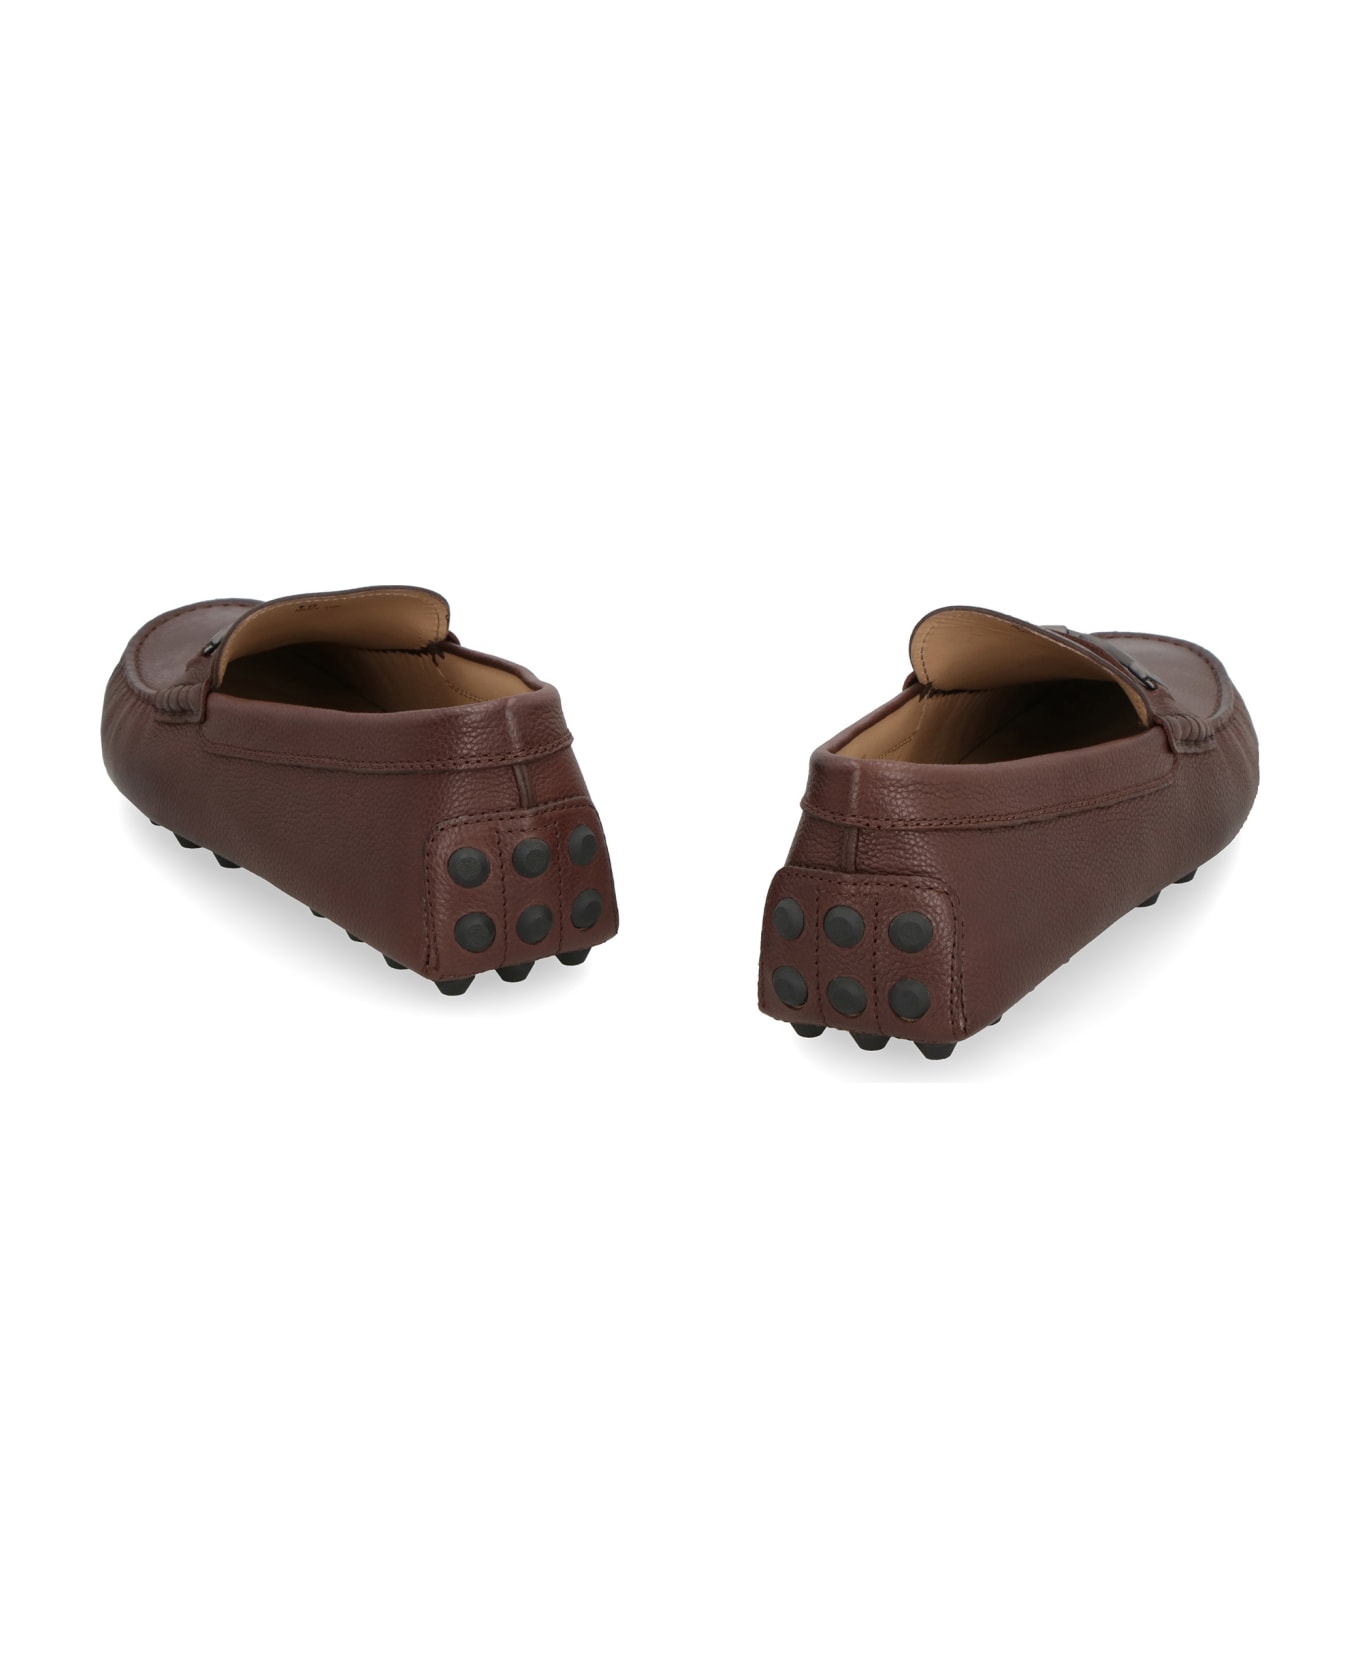 Tod's Leather Loafers - brown